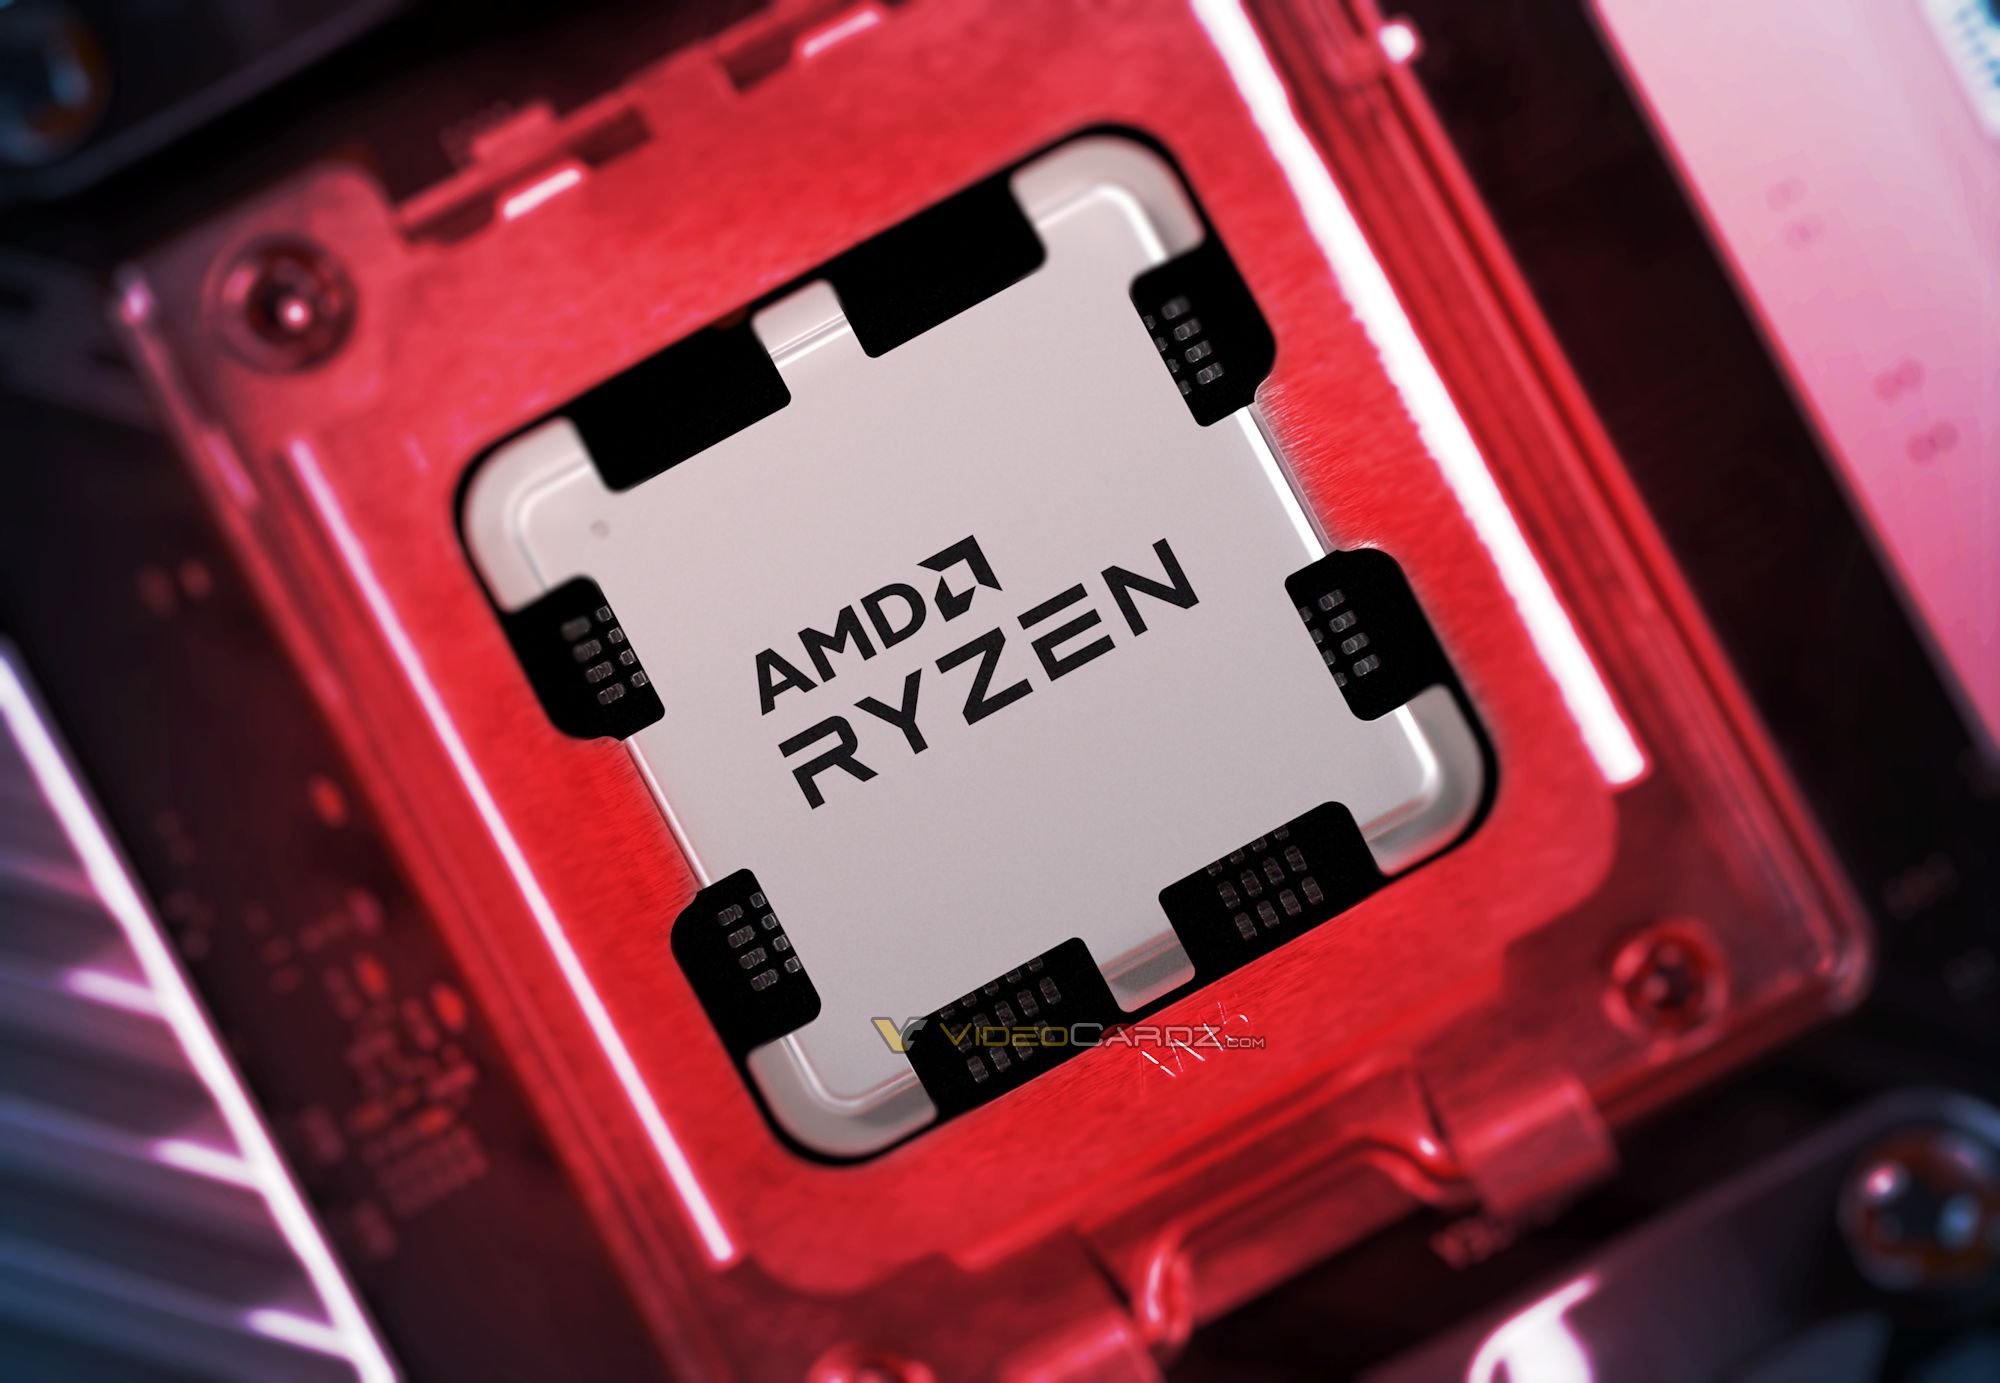 AMD Ryzen 9 7950X Zen4 CPU “F-max” frequency reportedly goes up to 5.85 GHz